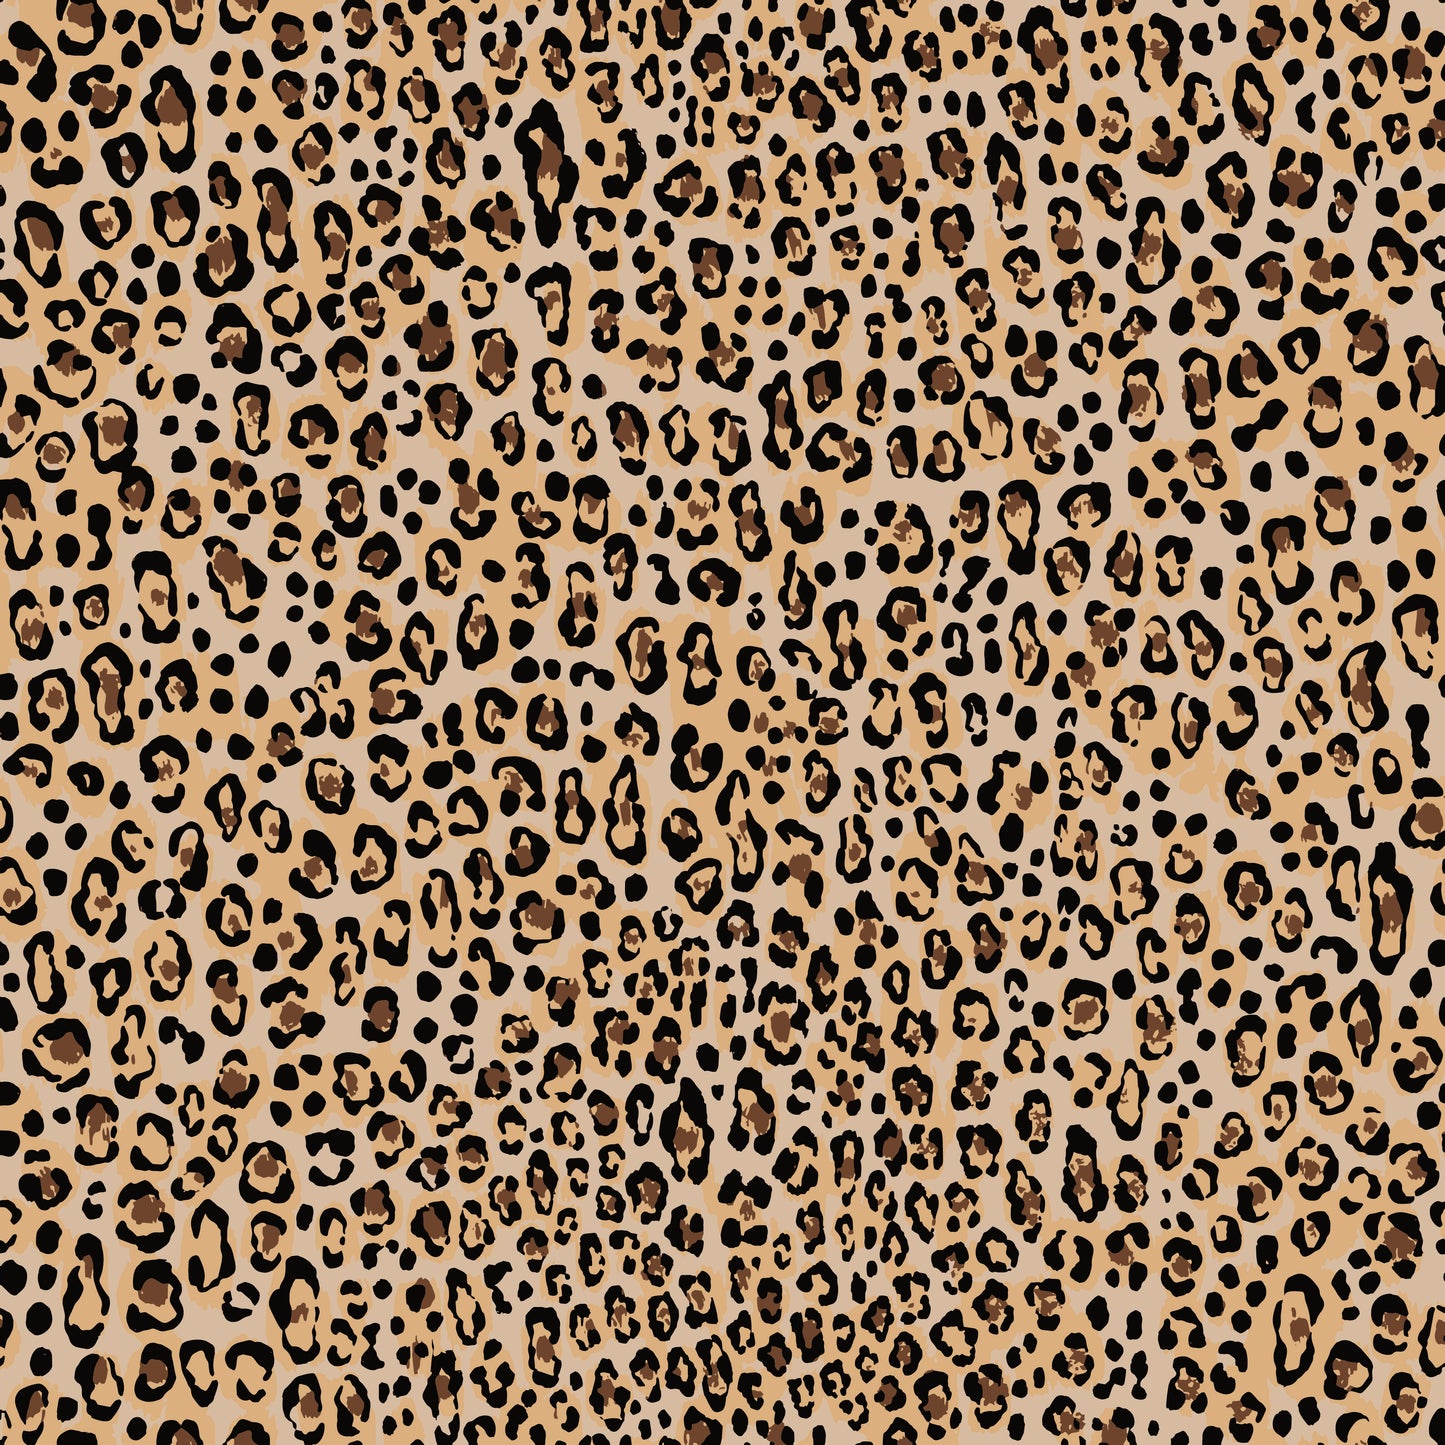 seamless jaguar leopard cheetah panther skin pattern animal background with small spots